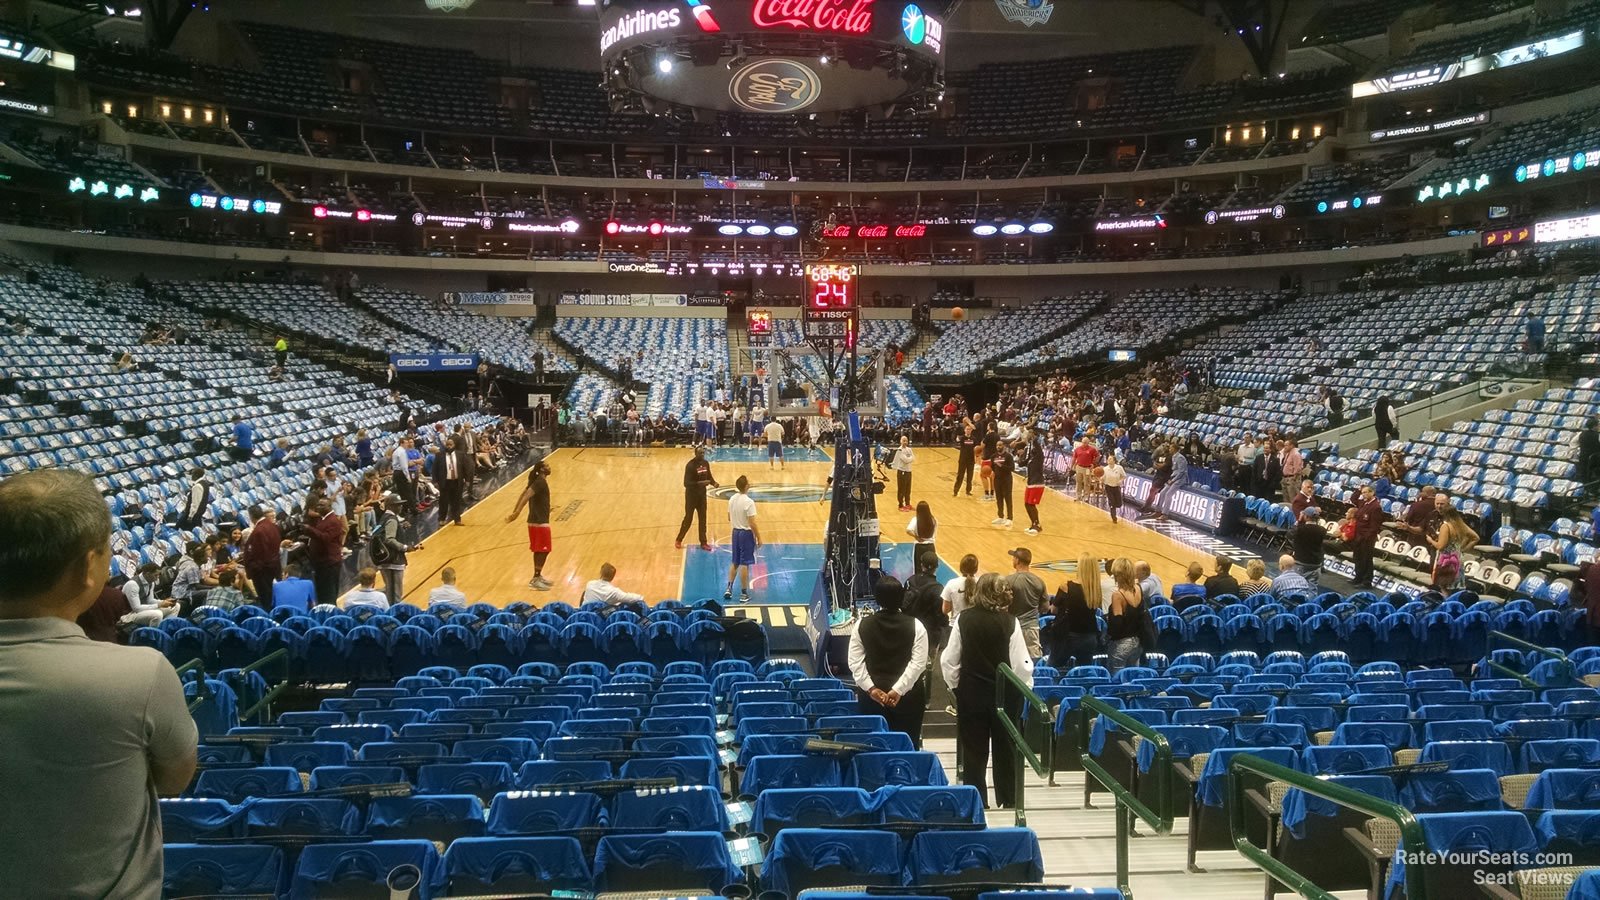 Section 101 at American Airlines Center Dallas Mavericks